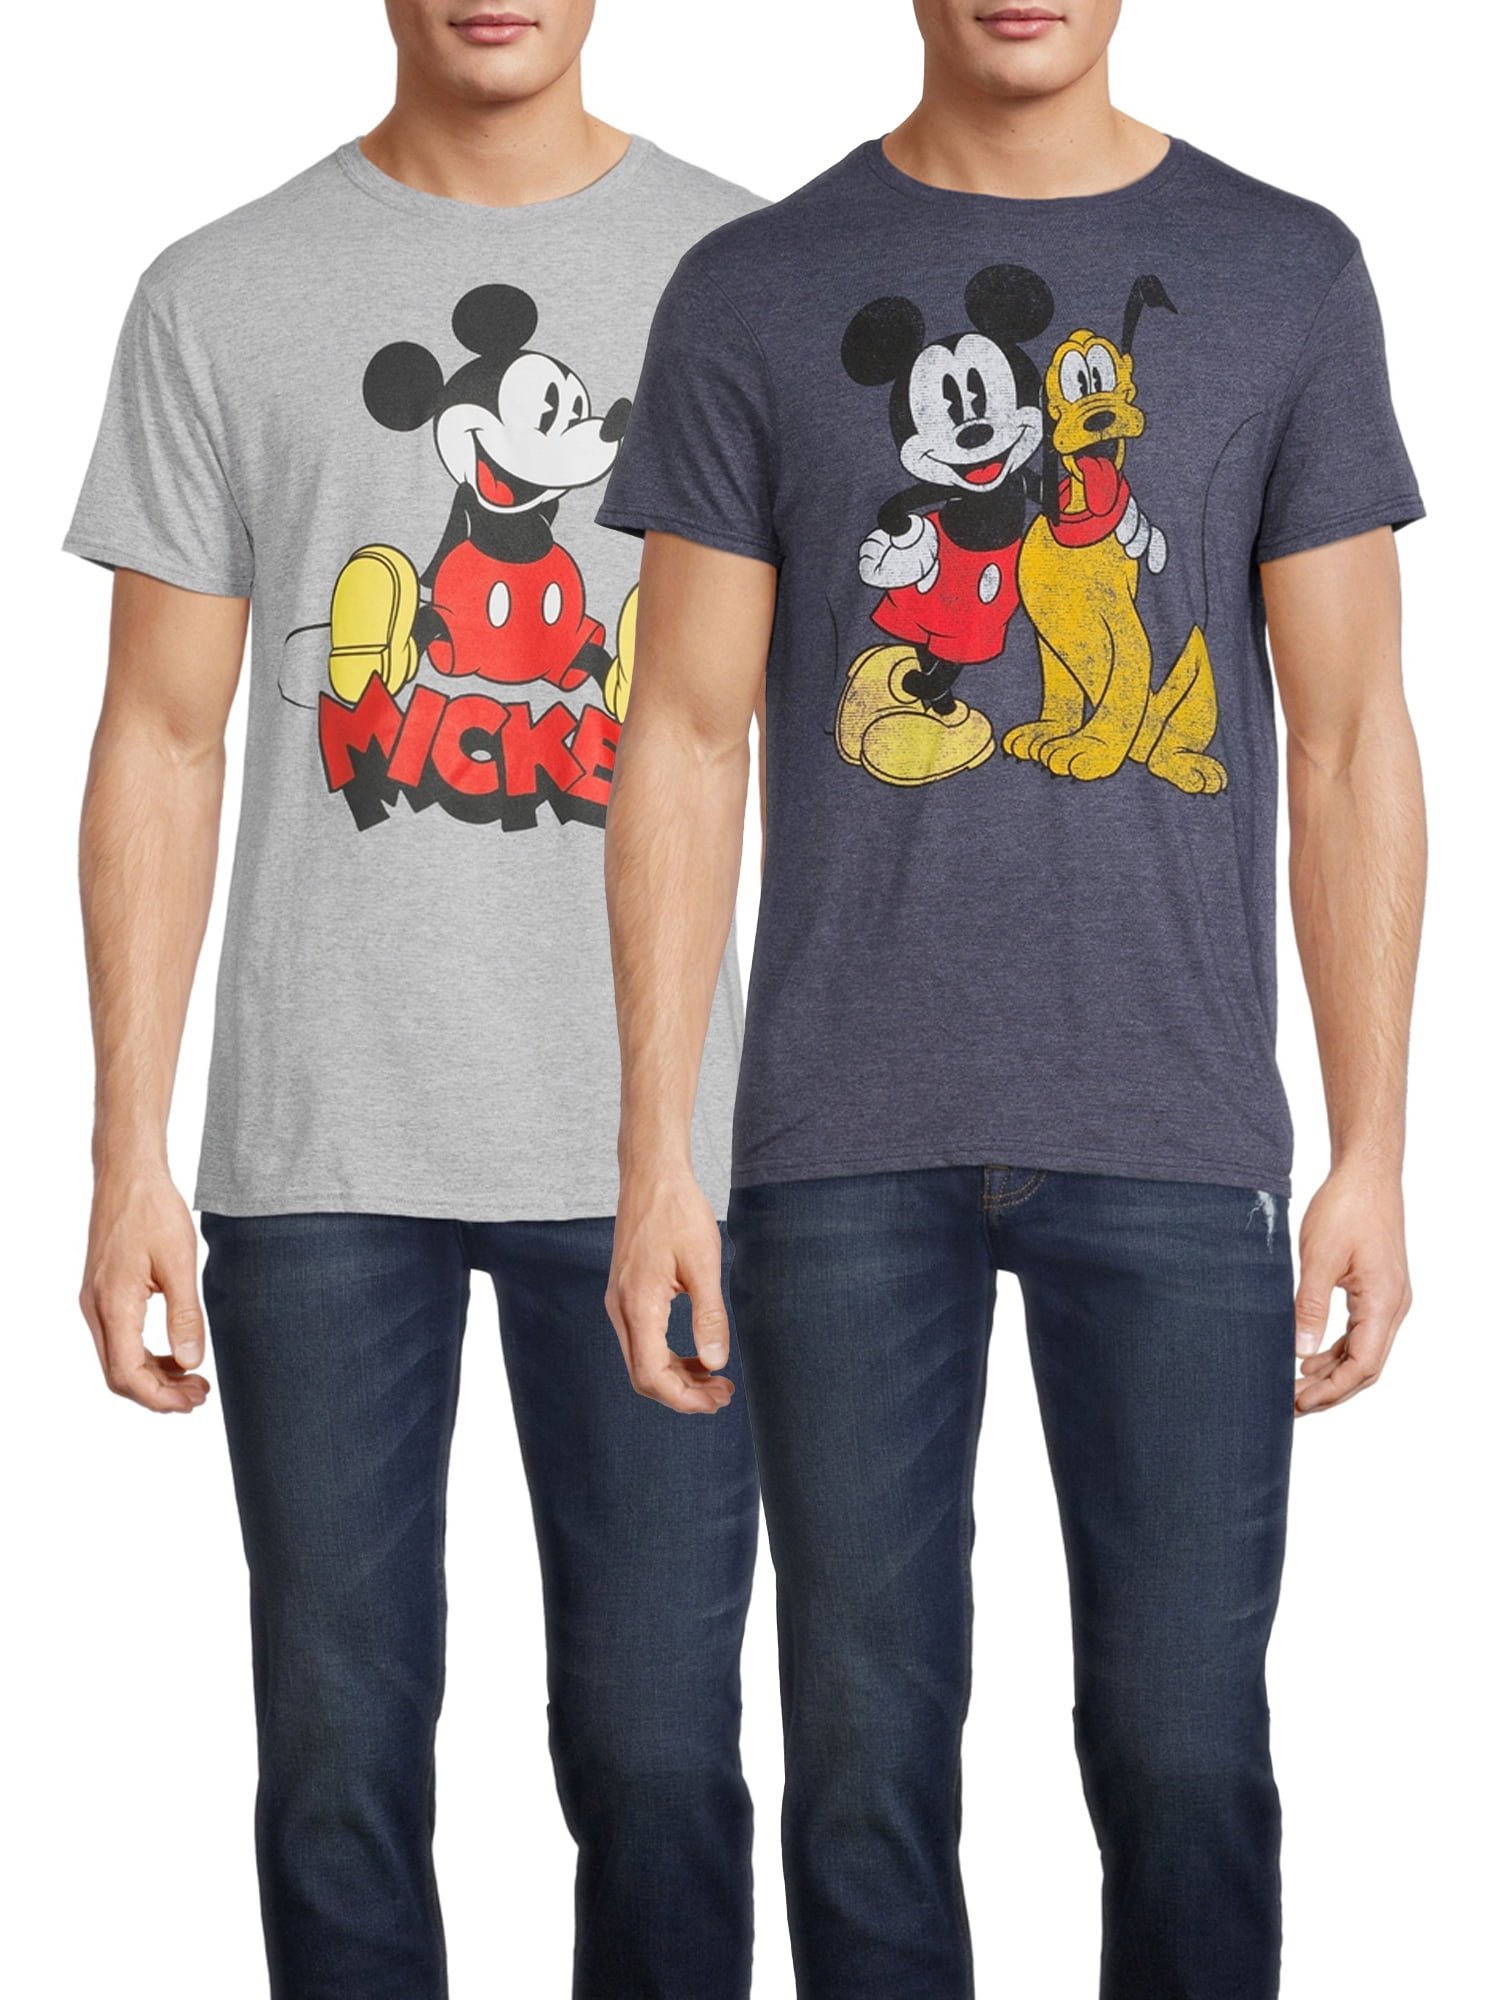 DISNEY MICKEY MINNIE MOUSE GOOFY PERSONALIZED T-SHIRT IRON ON TRANSFER 